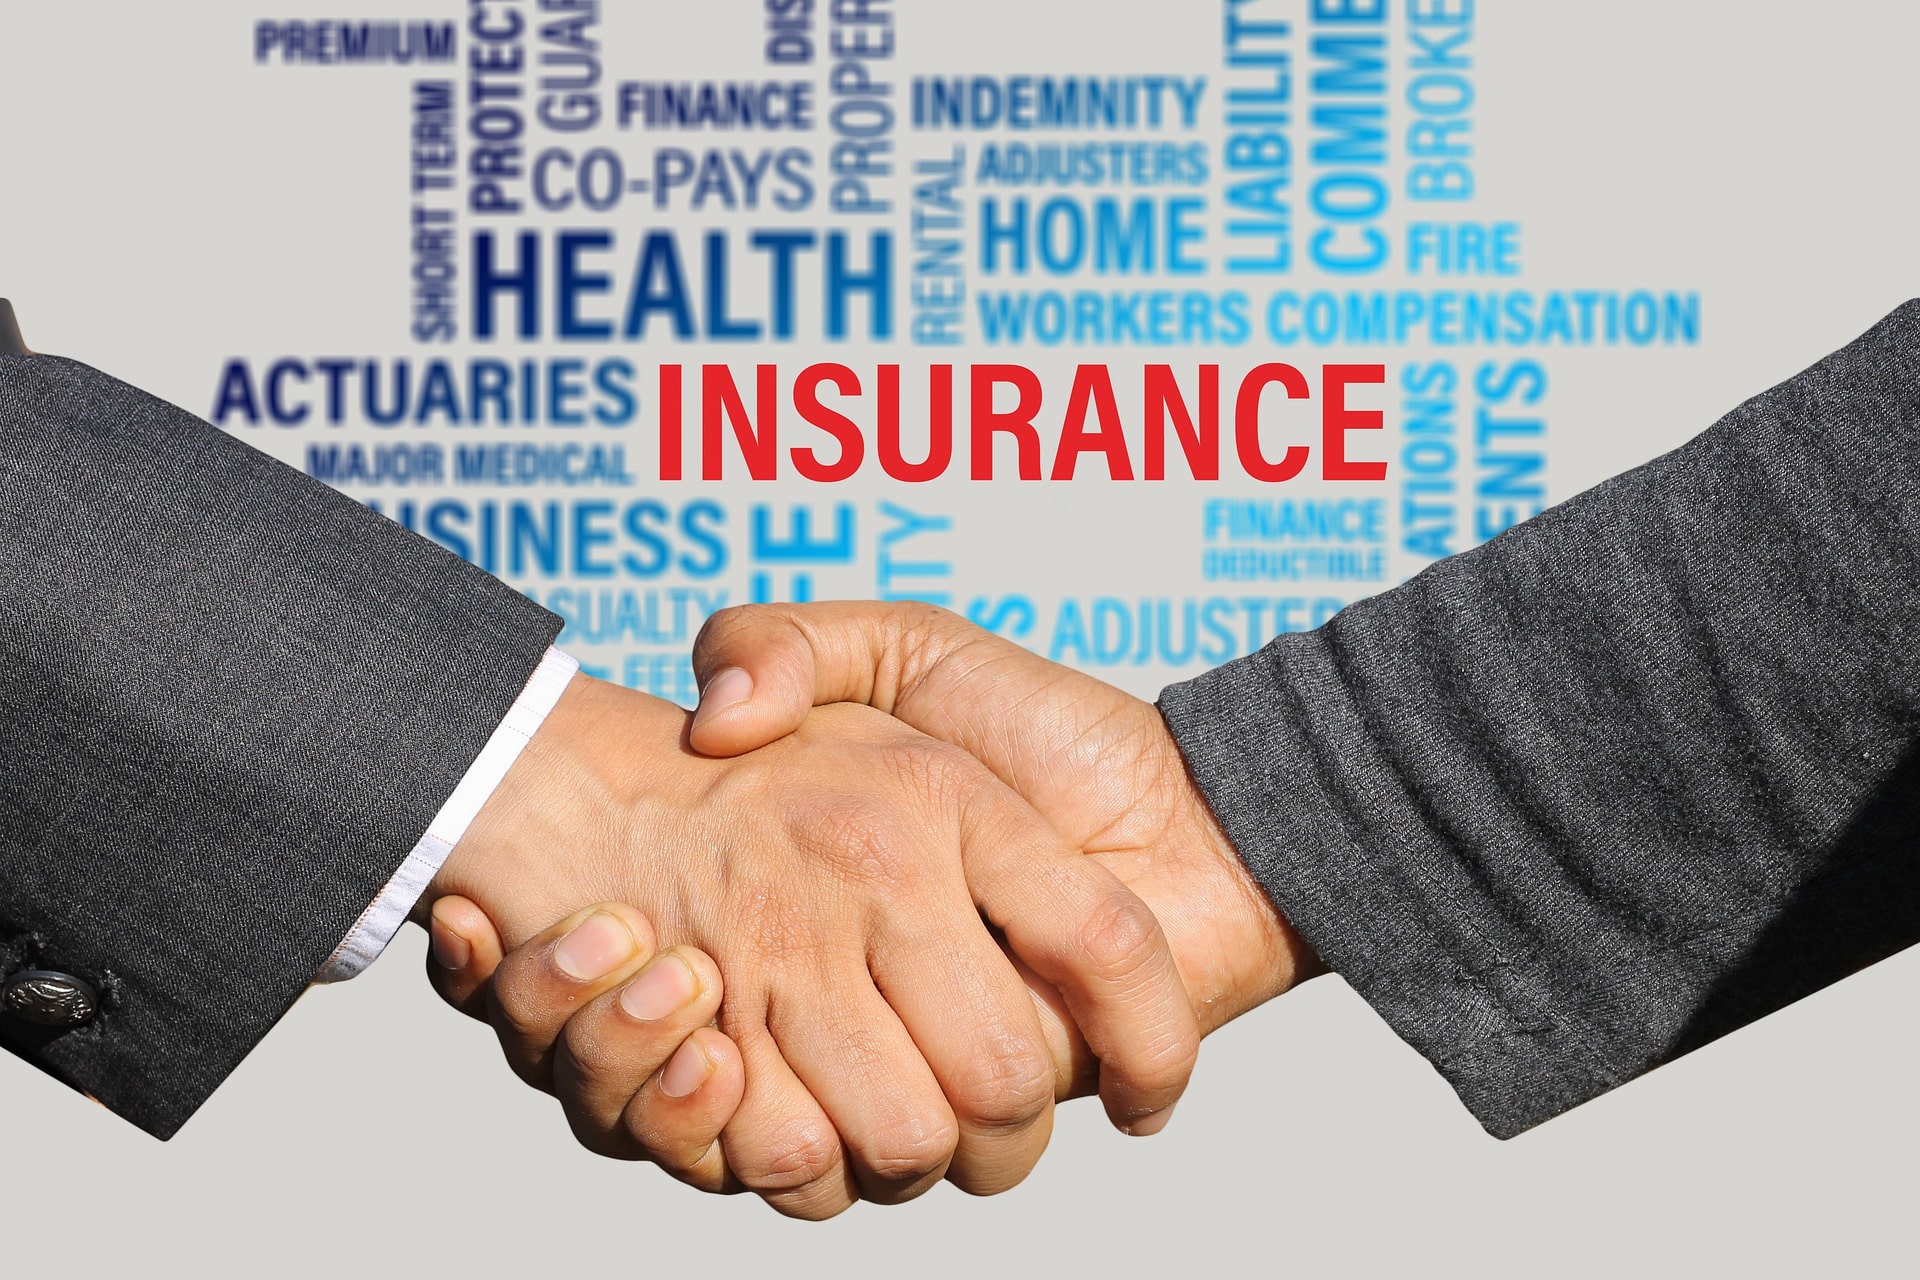 Shaking Hands with Insurance Graphic in the Background